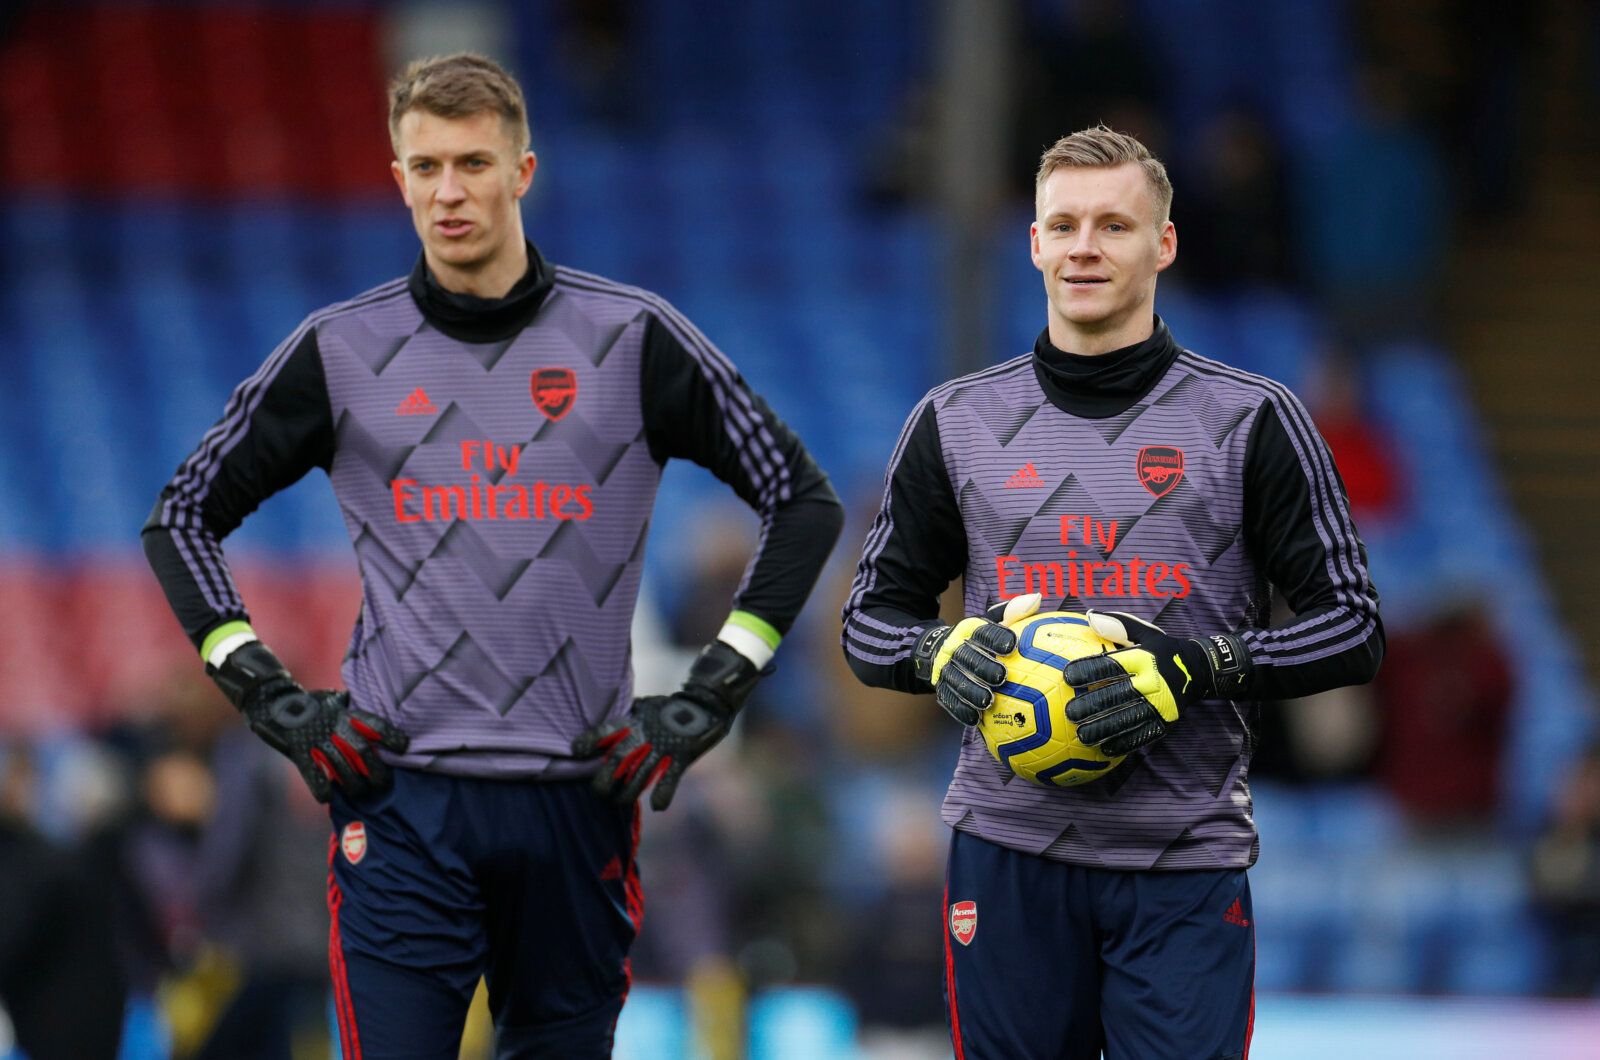 Soccer Football - Premier League - Crystal Palace v Arsenal - Selhurst Park, London, Britain - January 11, 2020  Arsenal's Bernd Leno and Matt Macey during the warm up before the match    Action Images via Reuters/John Sibley  EDITORIAL USE ONLY. No use with unauthorized audio, video, data, fixture lists, club/league logos or 